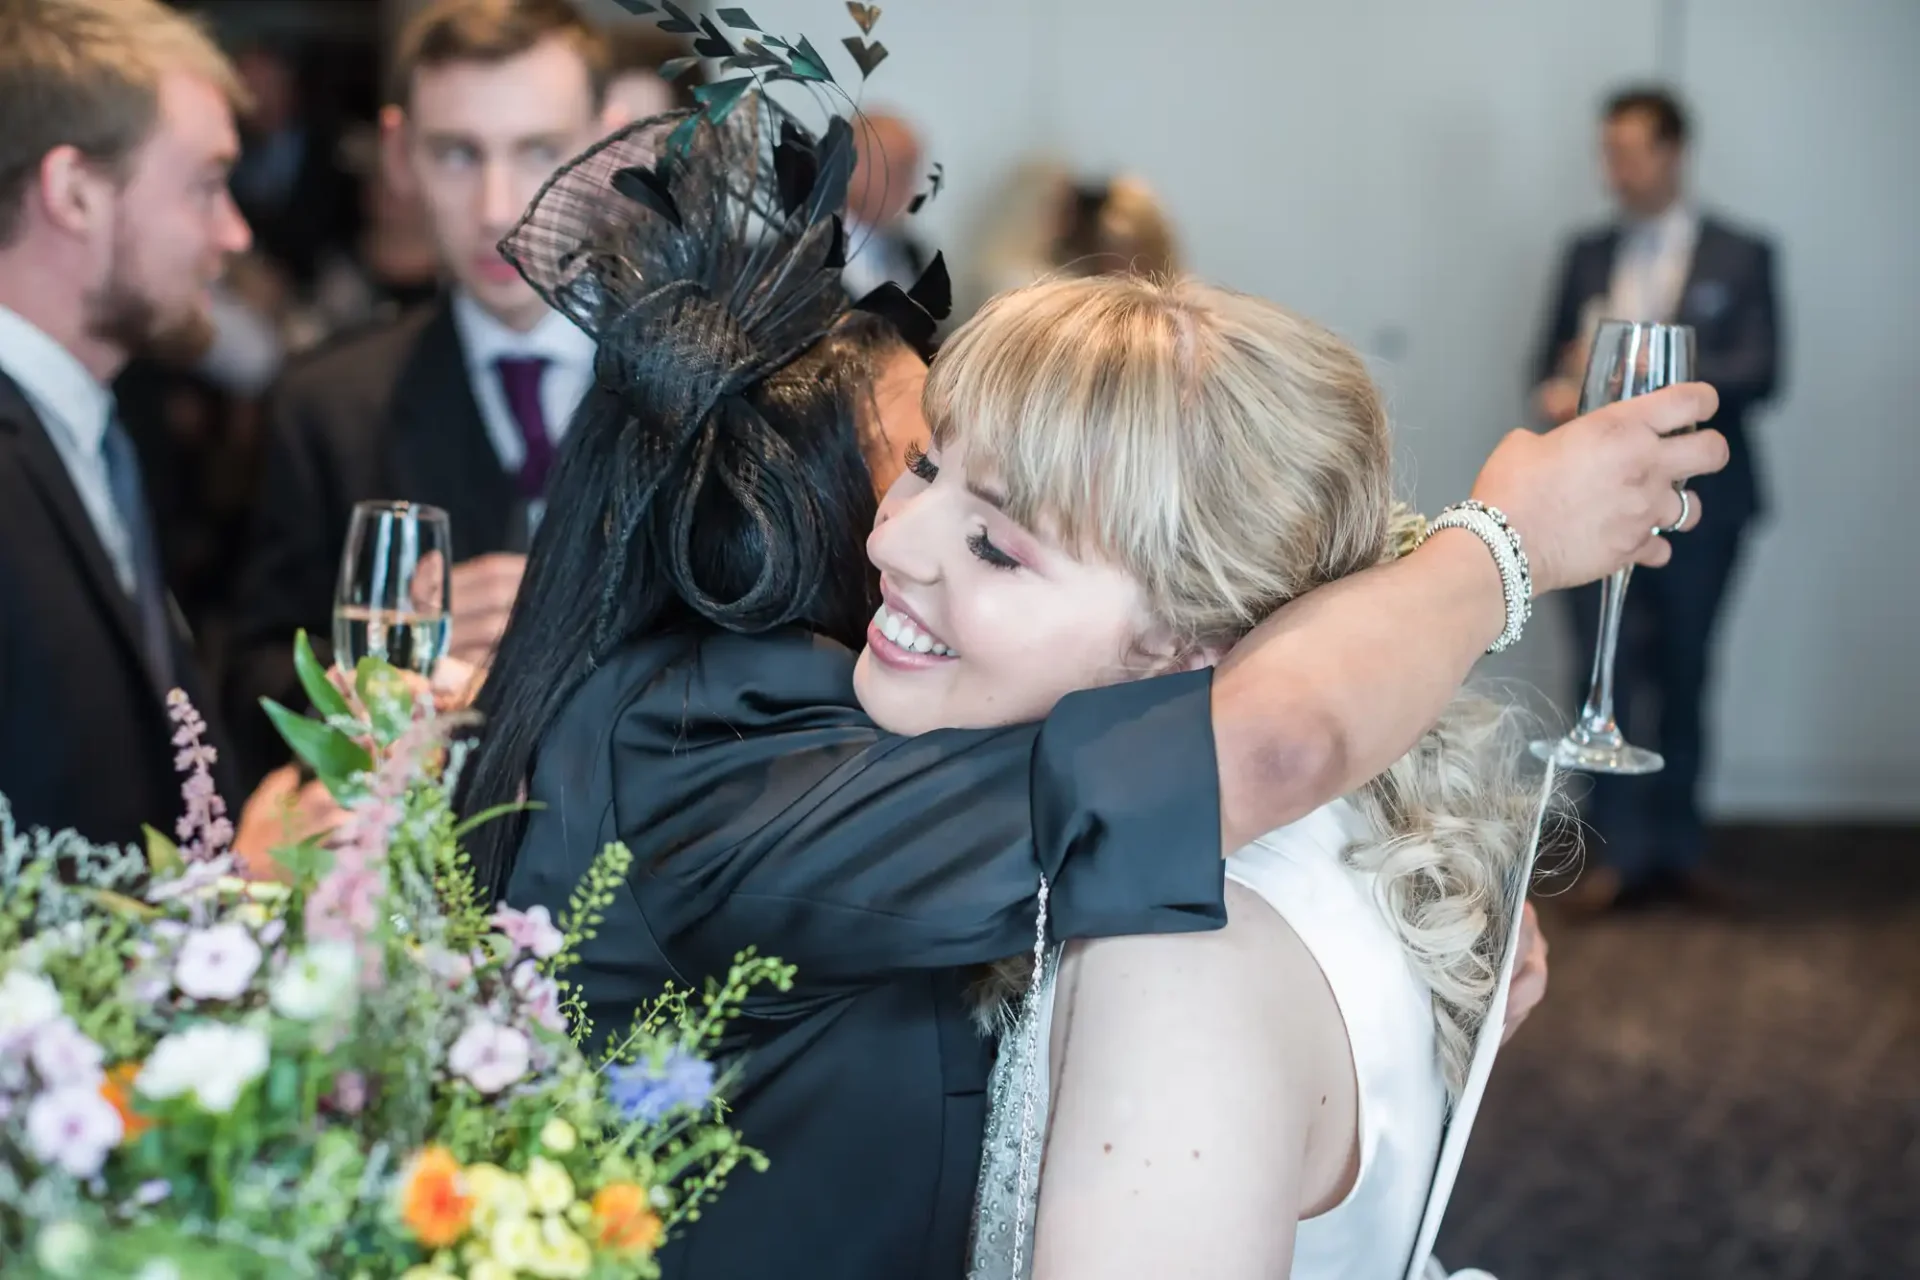 A joyful bride in a white dress hugs a guest wearing a black outfit and a large hat at a wedding reception, with other guests nearby holding champagne glasses.